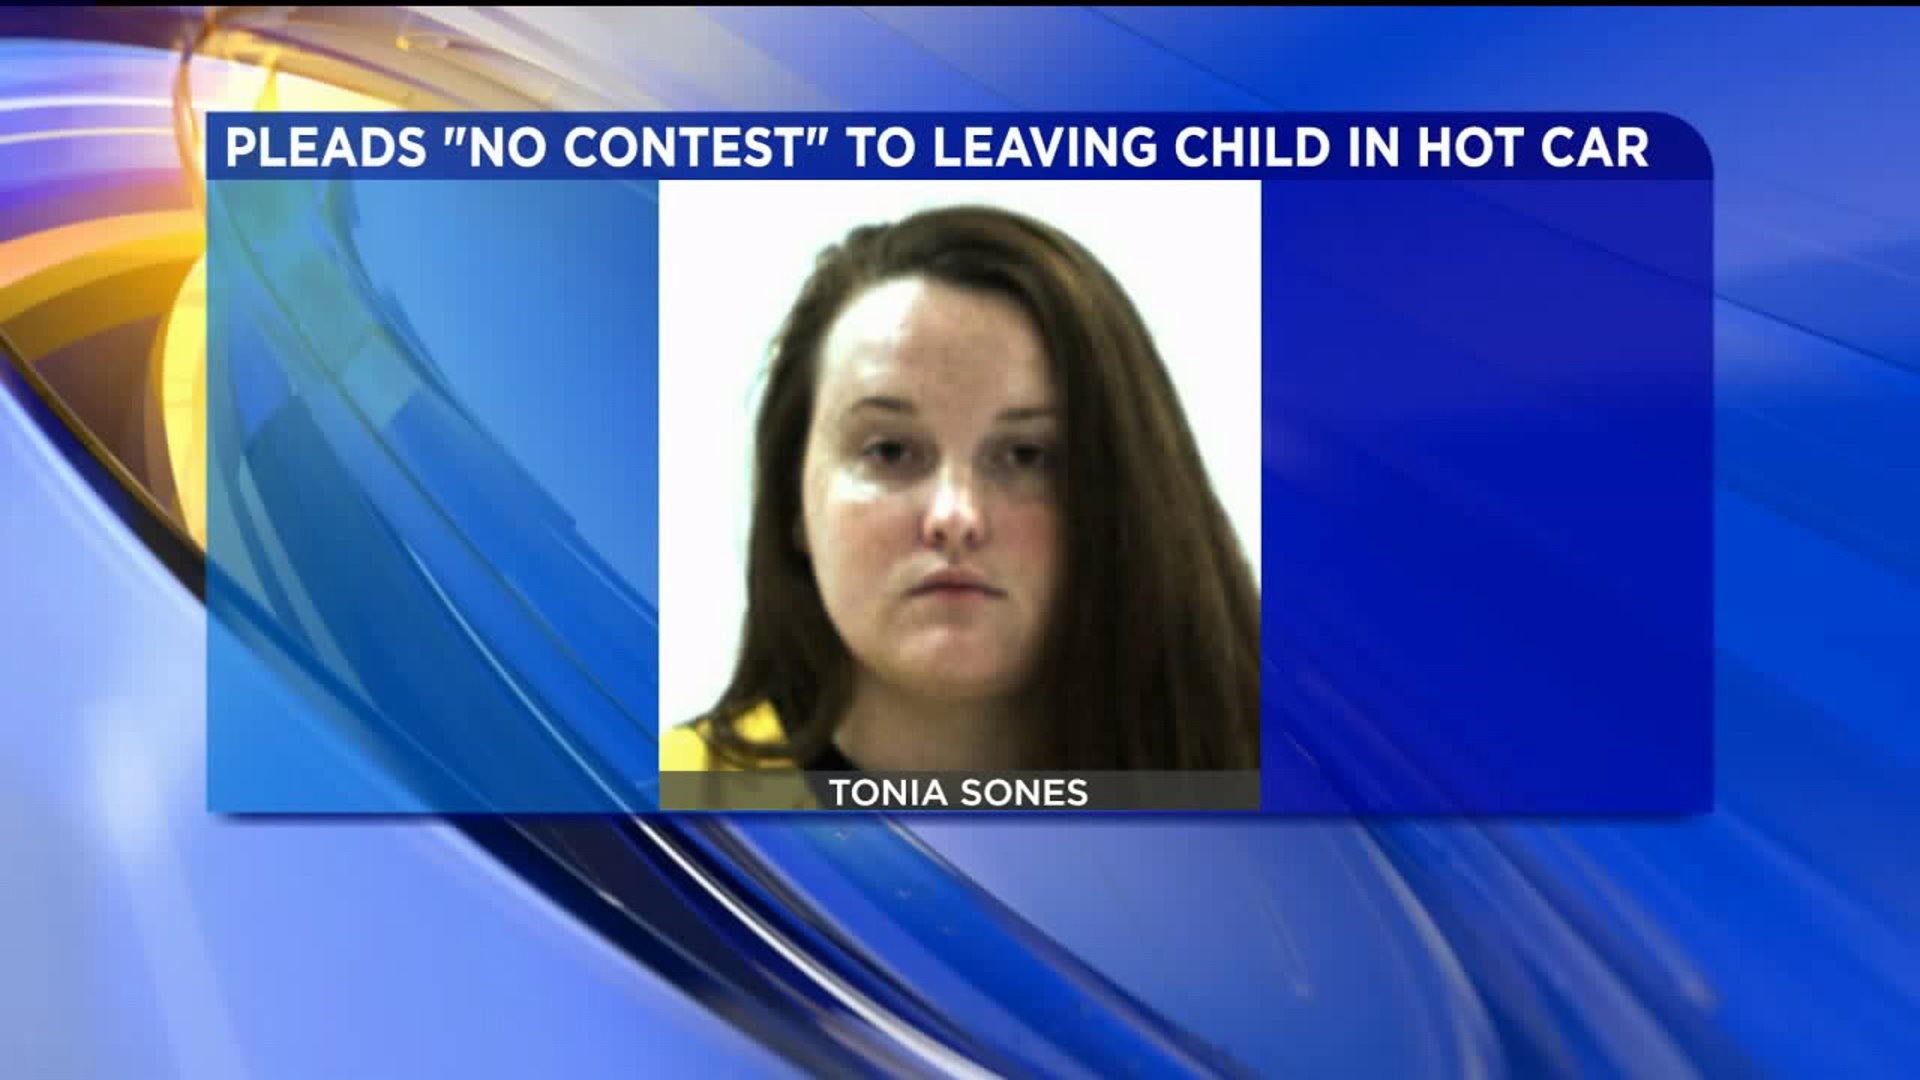 Mother Pleads No Contest After Leaving Child in Hot Car